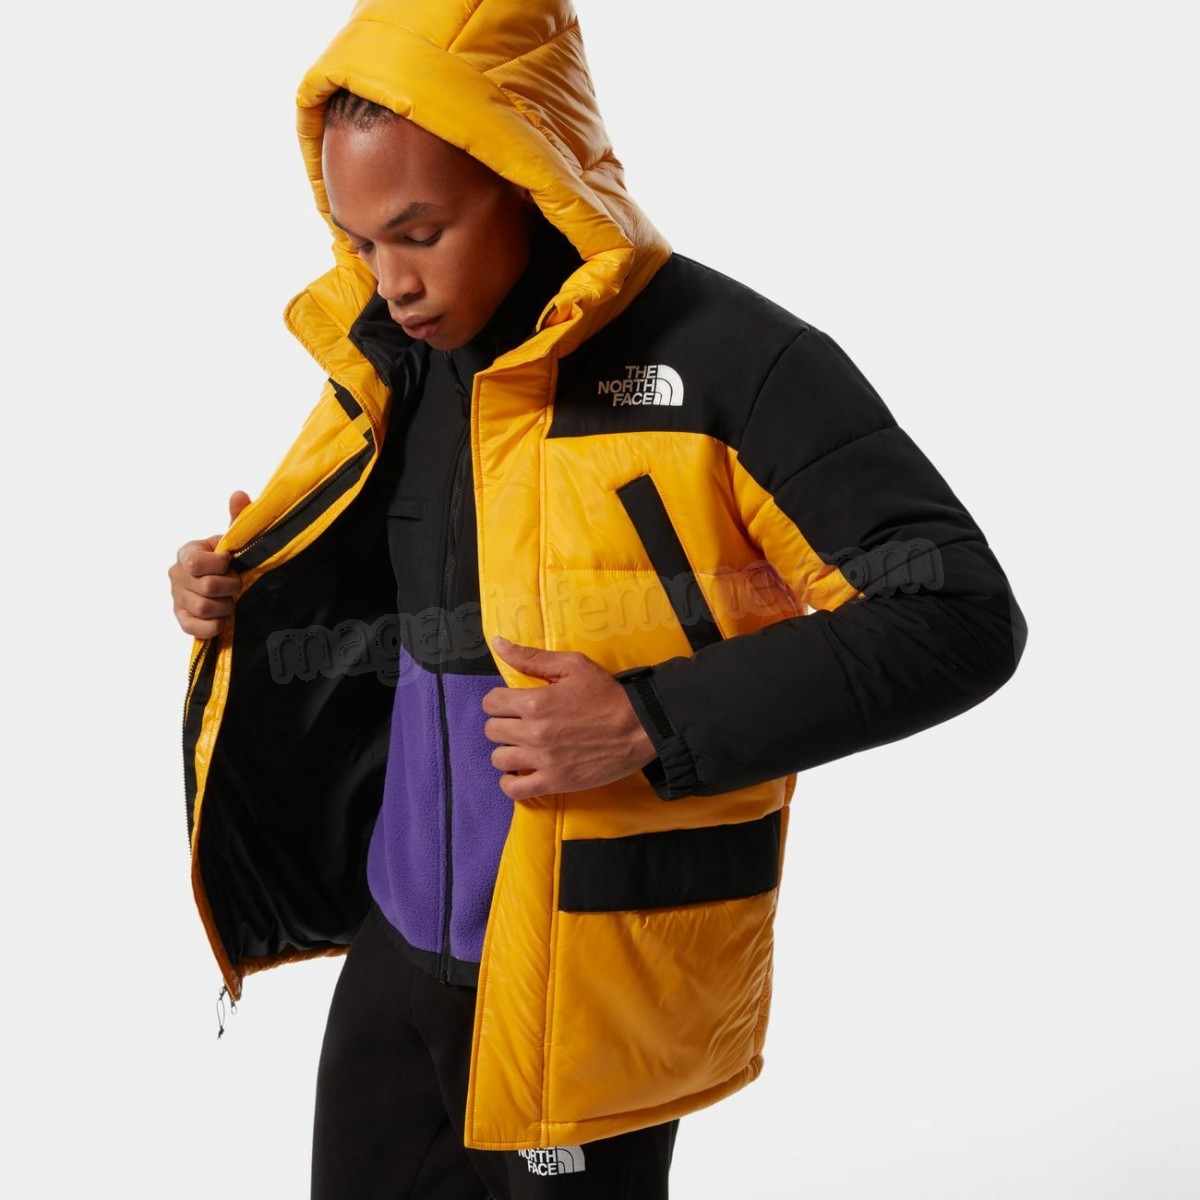 The North Face-mode homme THE NORTH FACE Himalayan Insulated Parka en solde - -14